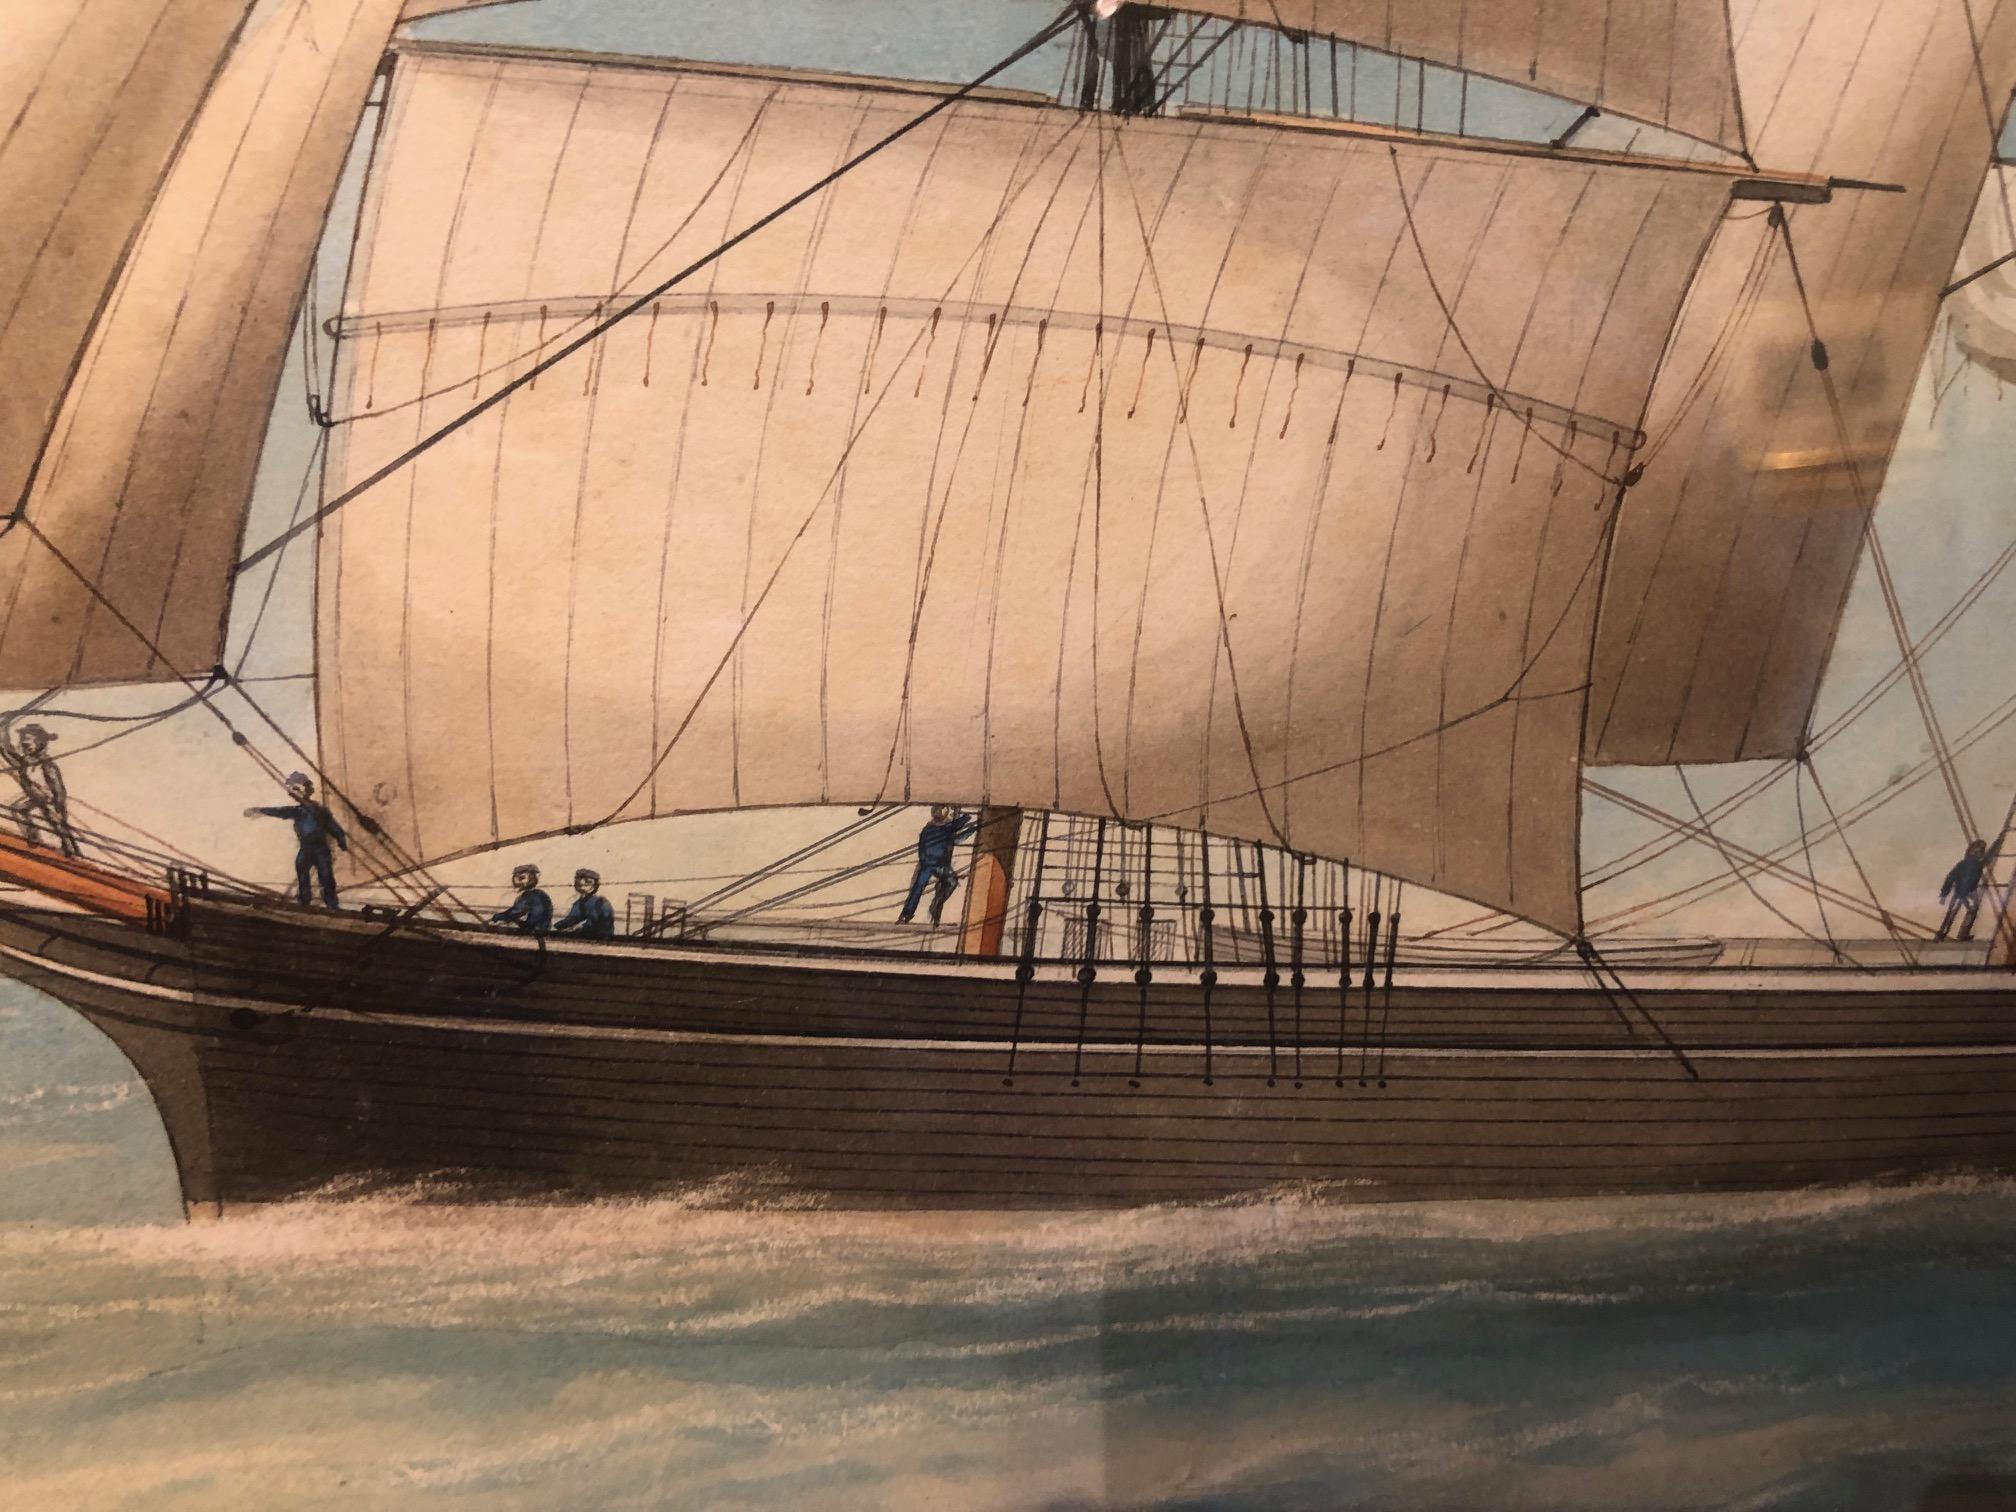 Although this is unsigned, it is one of a very collectable genre of ship's paintings.  Often called Pierhead Paintings, they were frequently commissioned by the Ship's Owner and is a record of the Vessel often the characters on deck include the